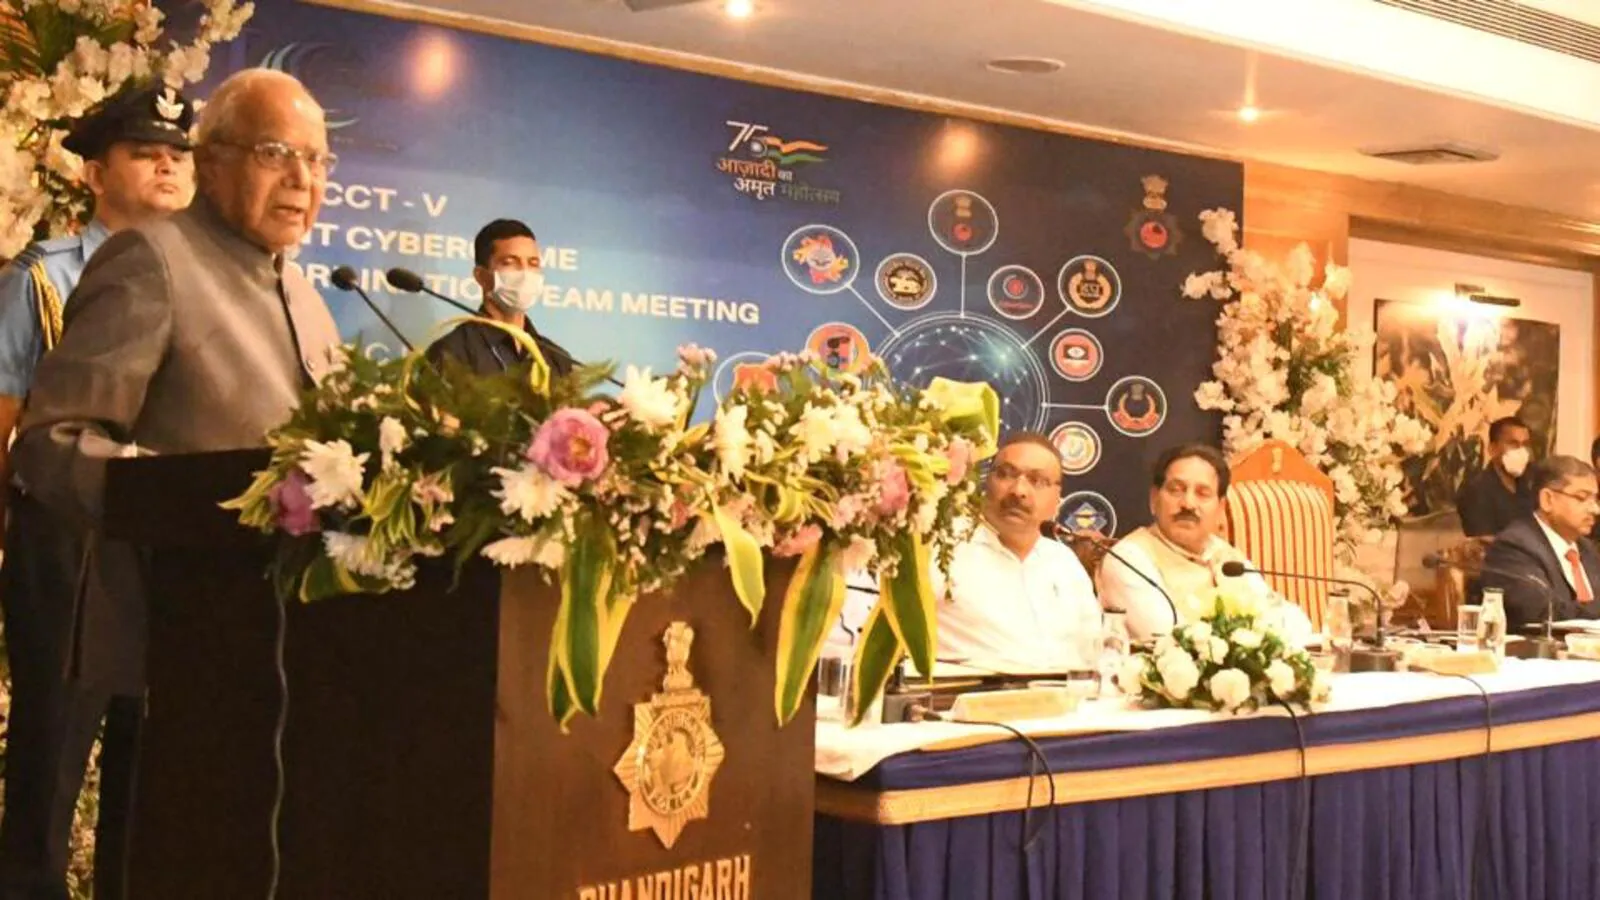 Joint coordination team holds conference in Chandigarh to discuss cybercrime